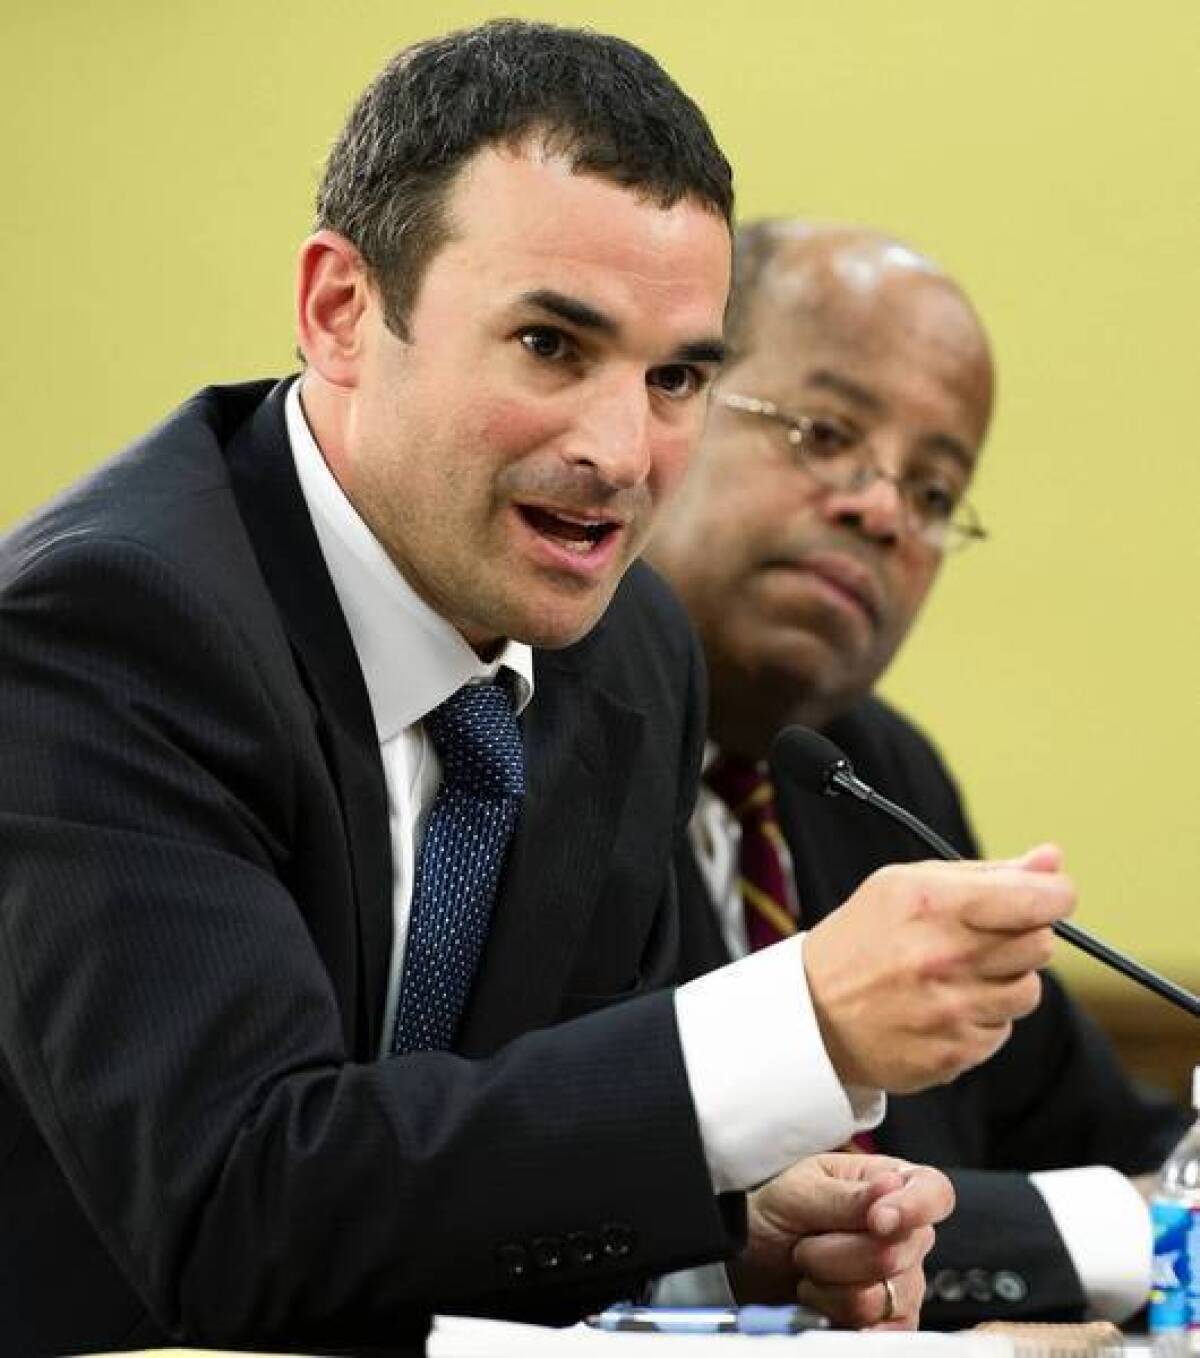 Acting IRS Commissioner Daniel Werfel told lawmakers: “This important agency is founded on a principle of operating impartially. And we failed in that most basic core principle."